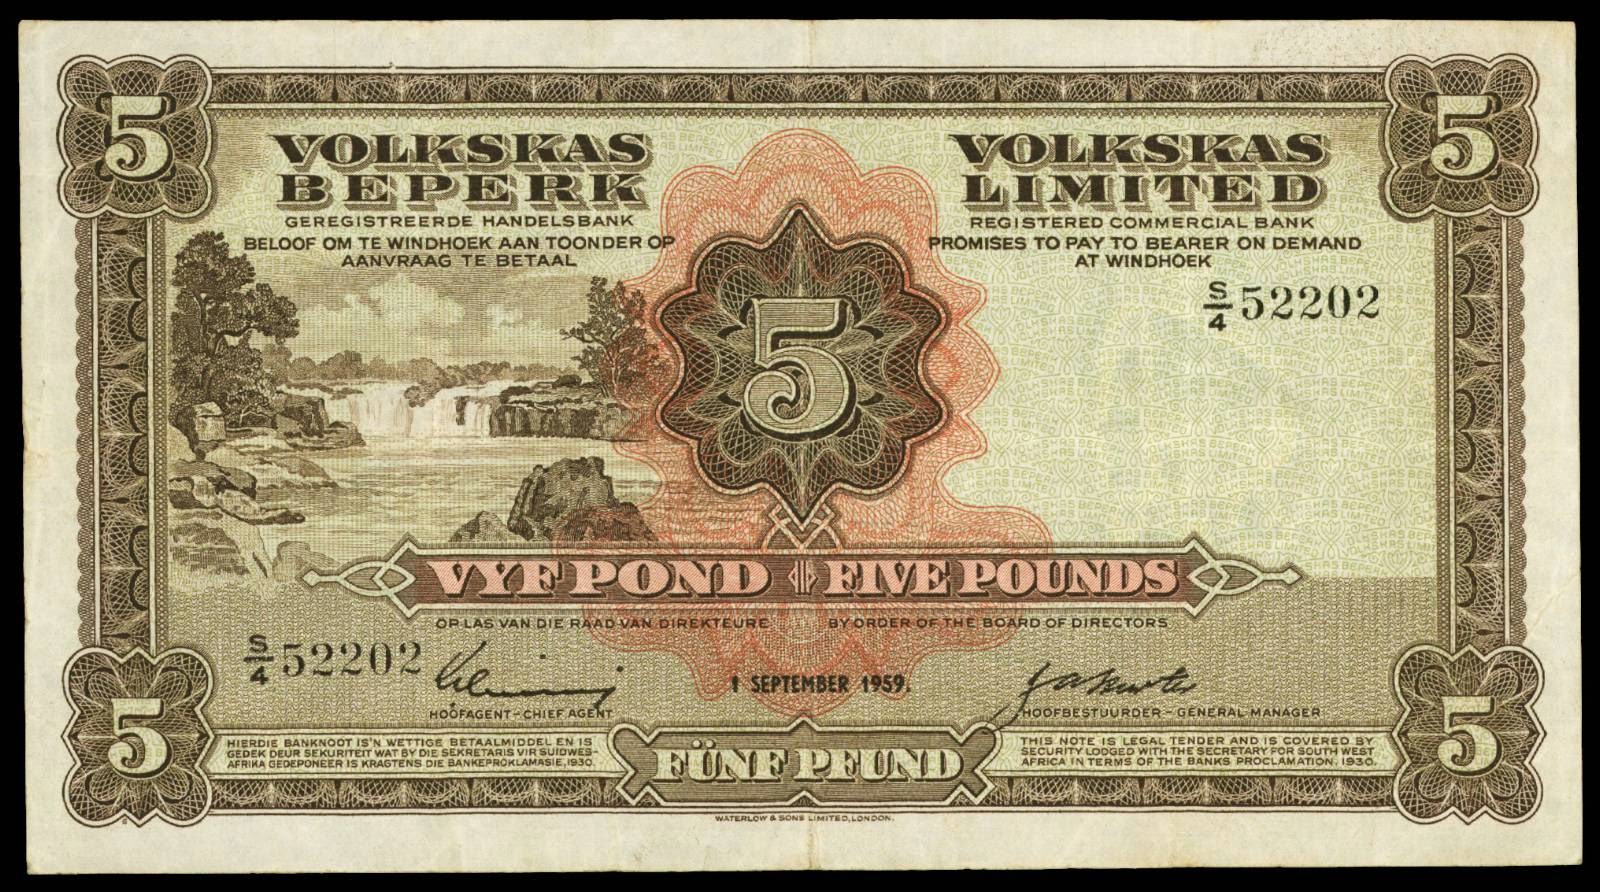 South West Africa 5 pounds banknote Volkskas